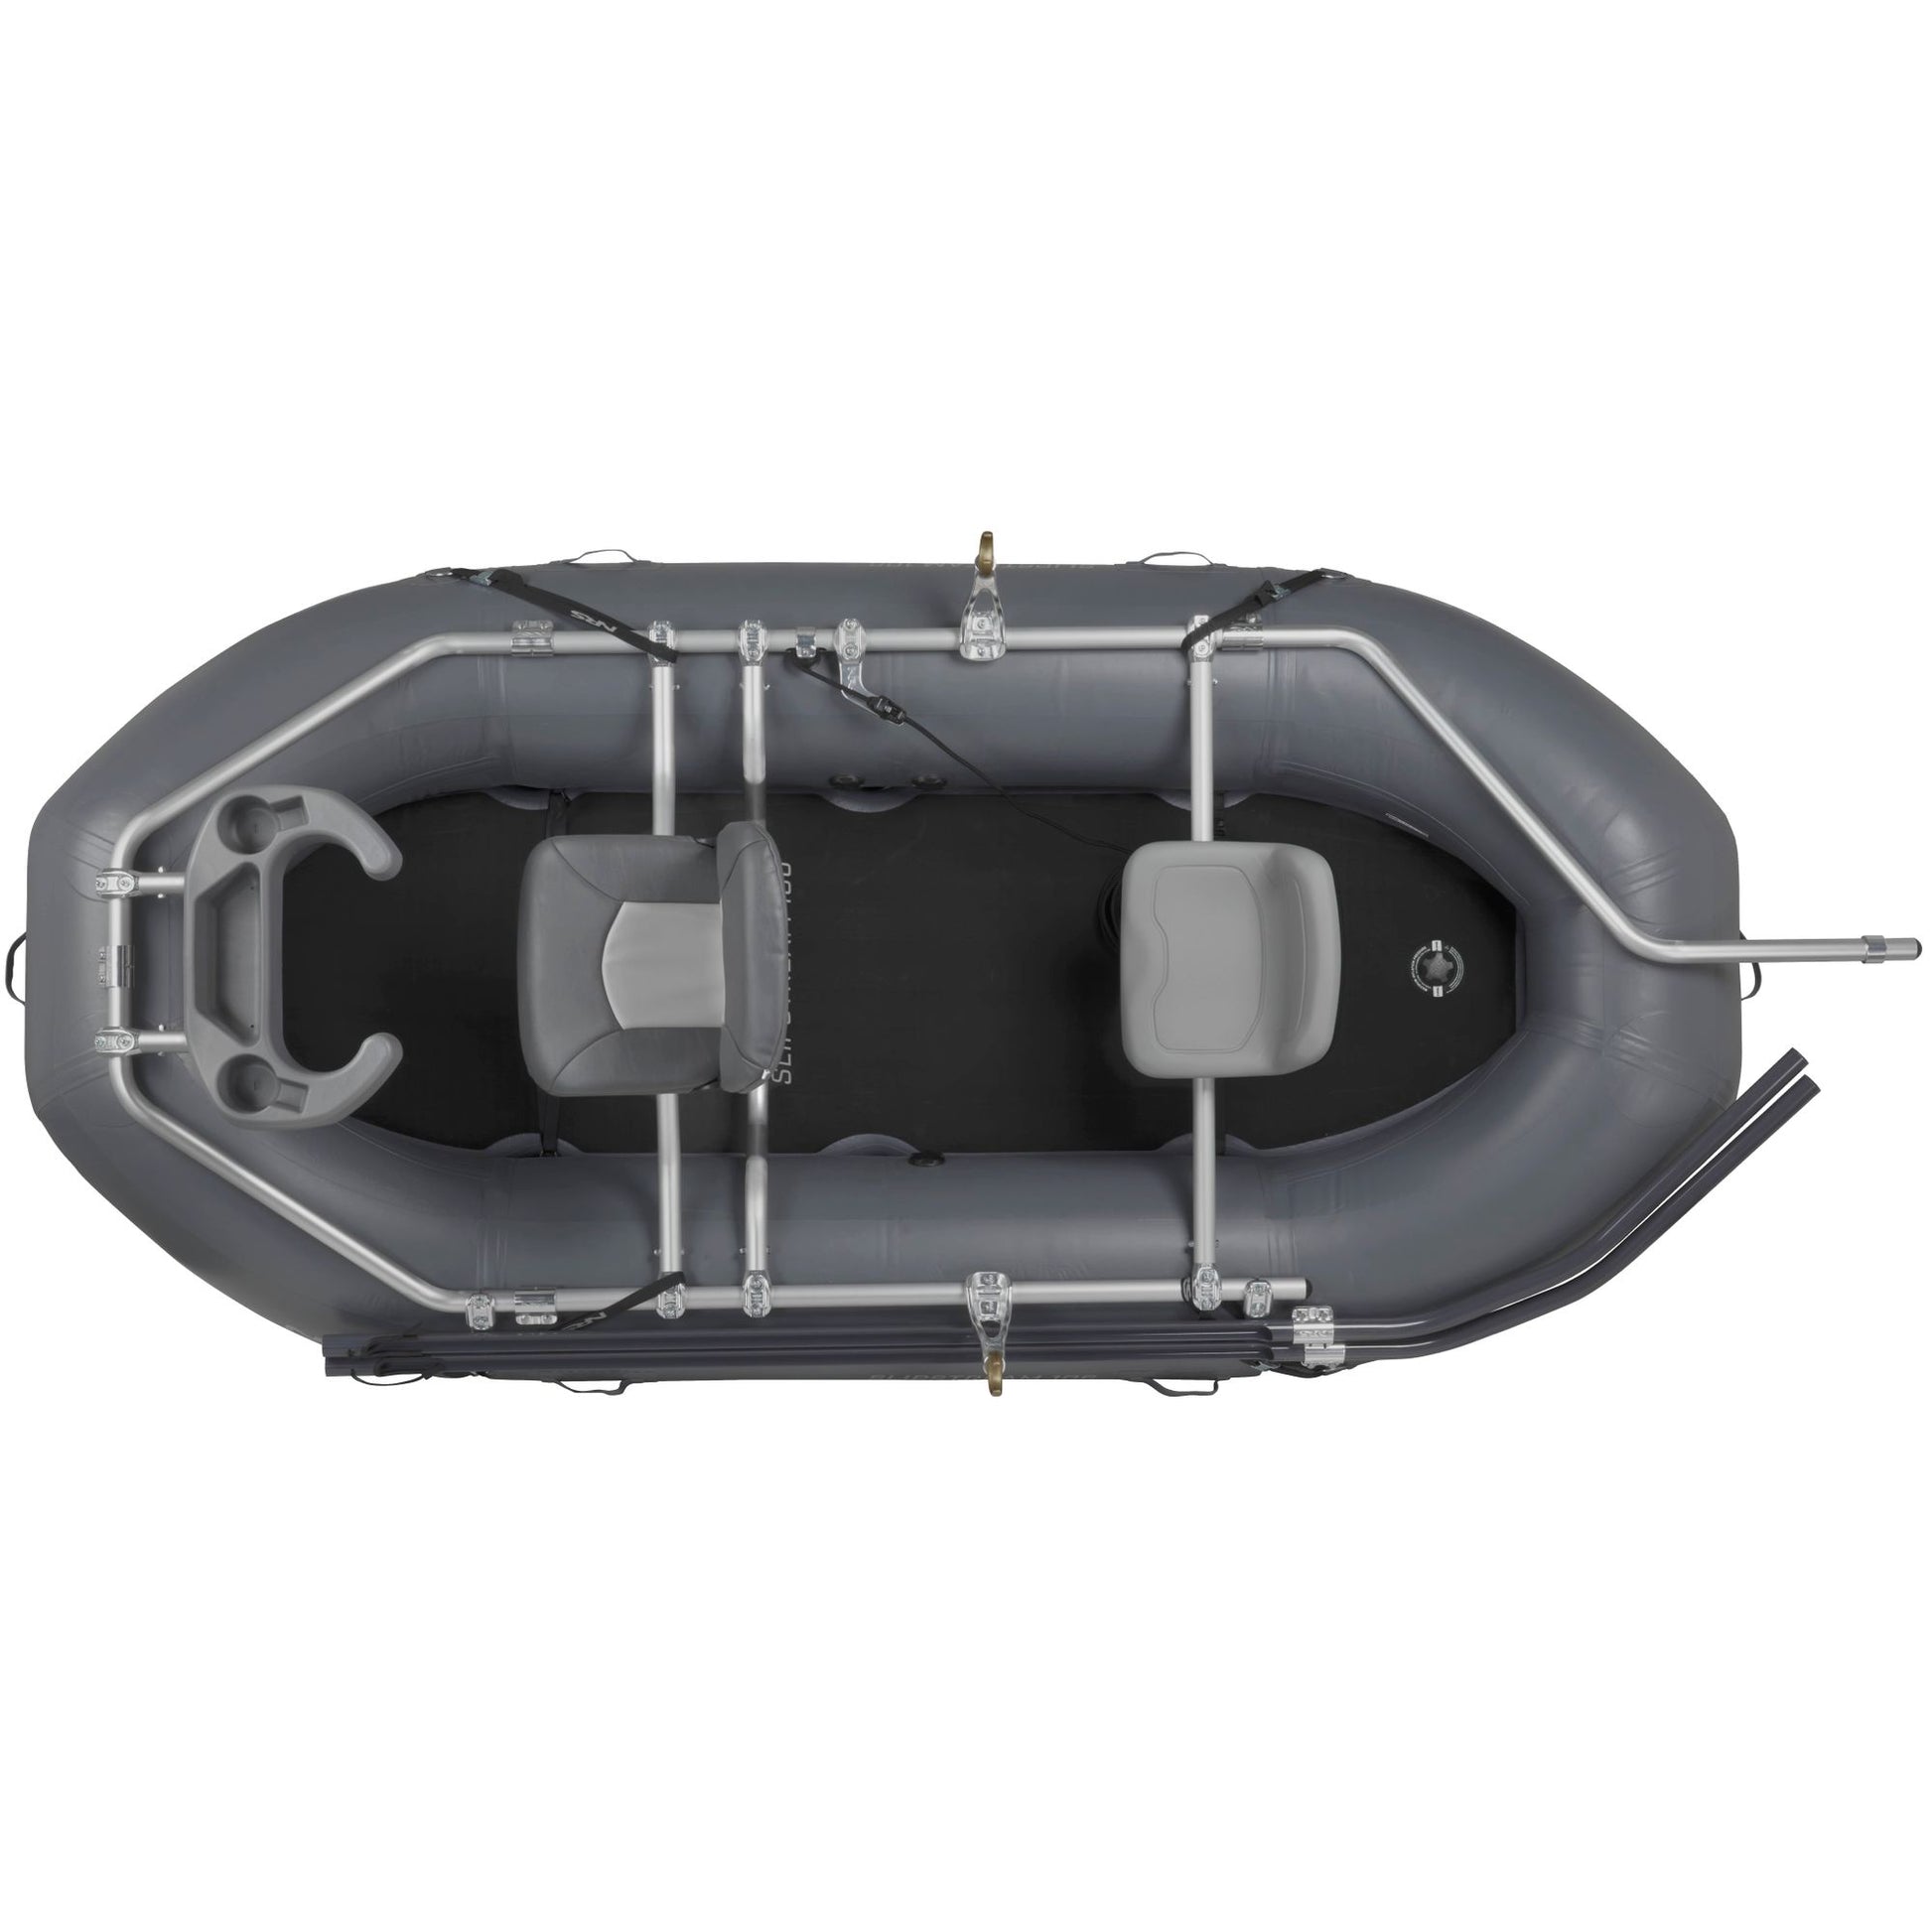 A gray NRS Slipstream Fishing Raft with a seat, two seats, and a slip-resistant foam pad.